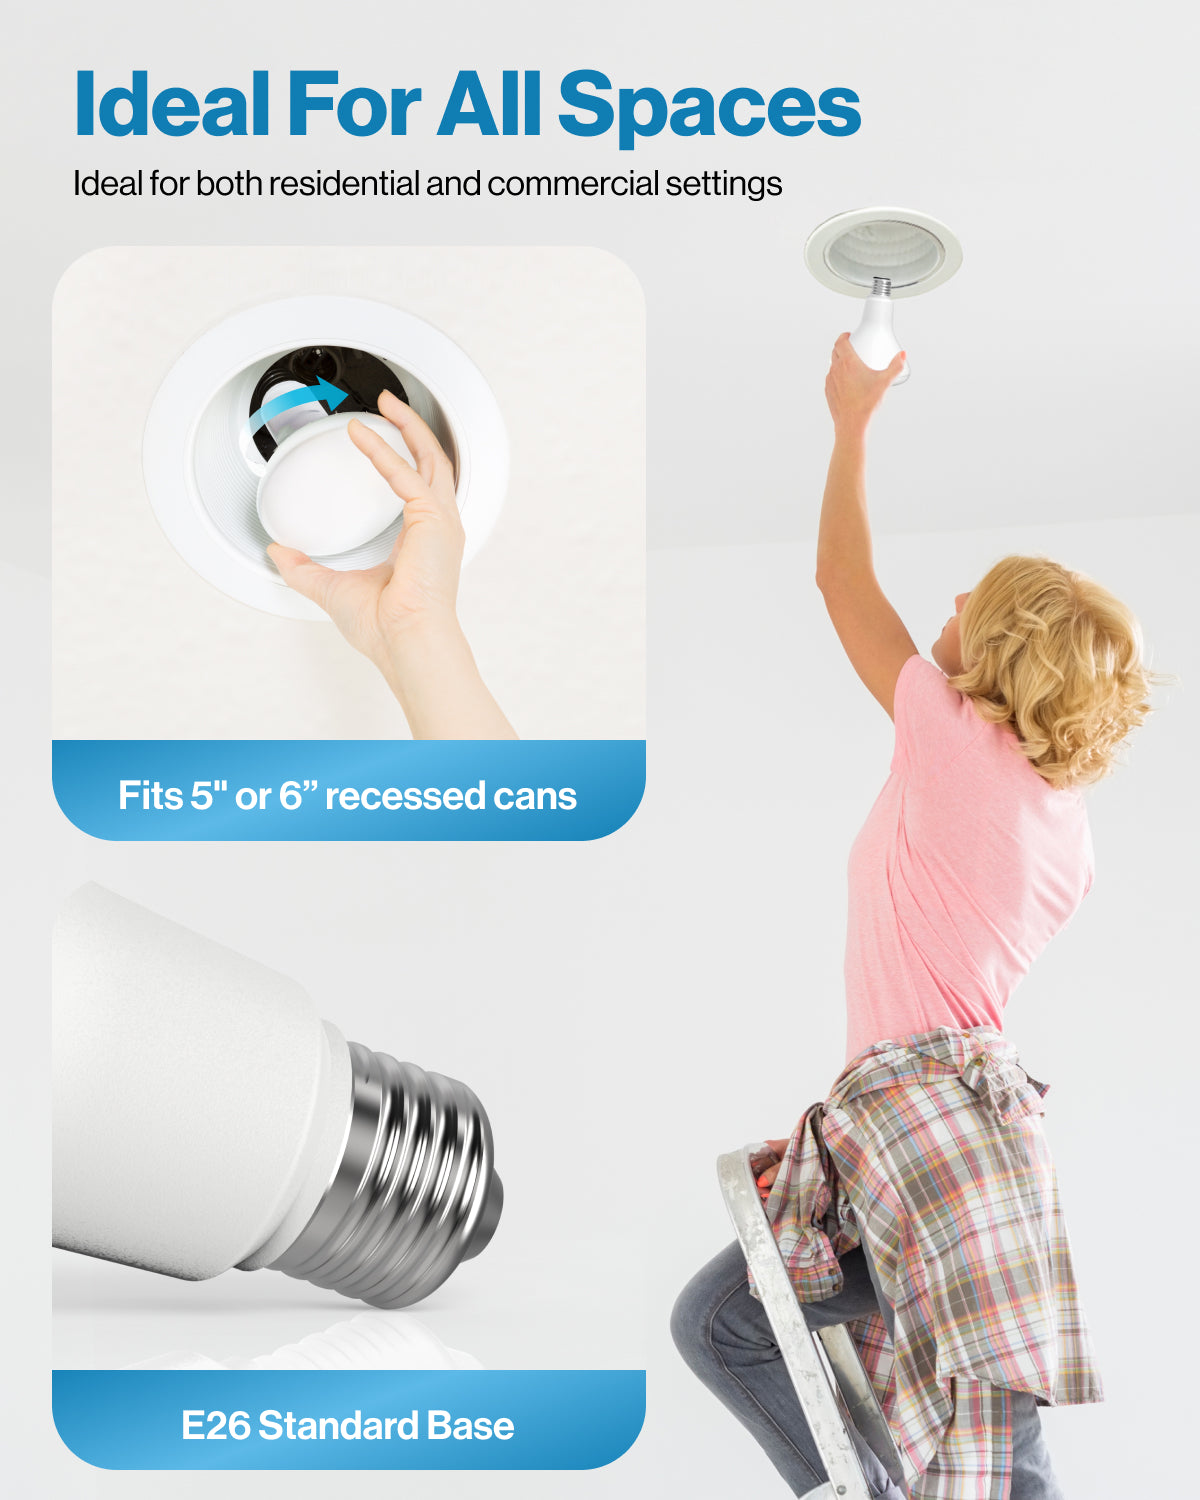 Apply the bulb in many common fixtures for various light coverages, such as a vanity mirror or an office space.